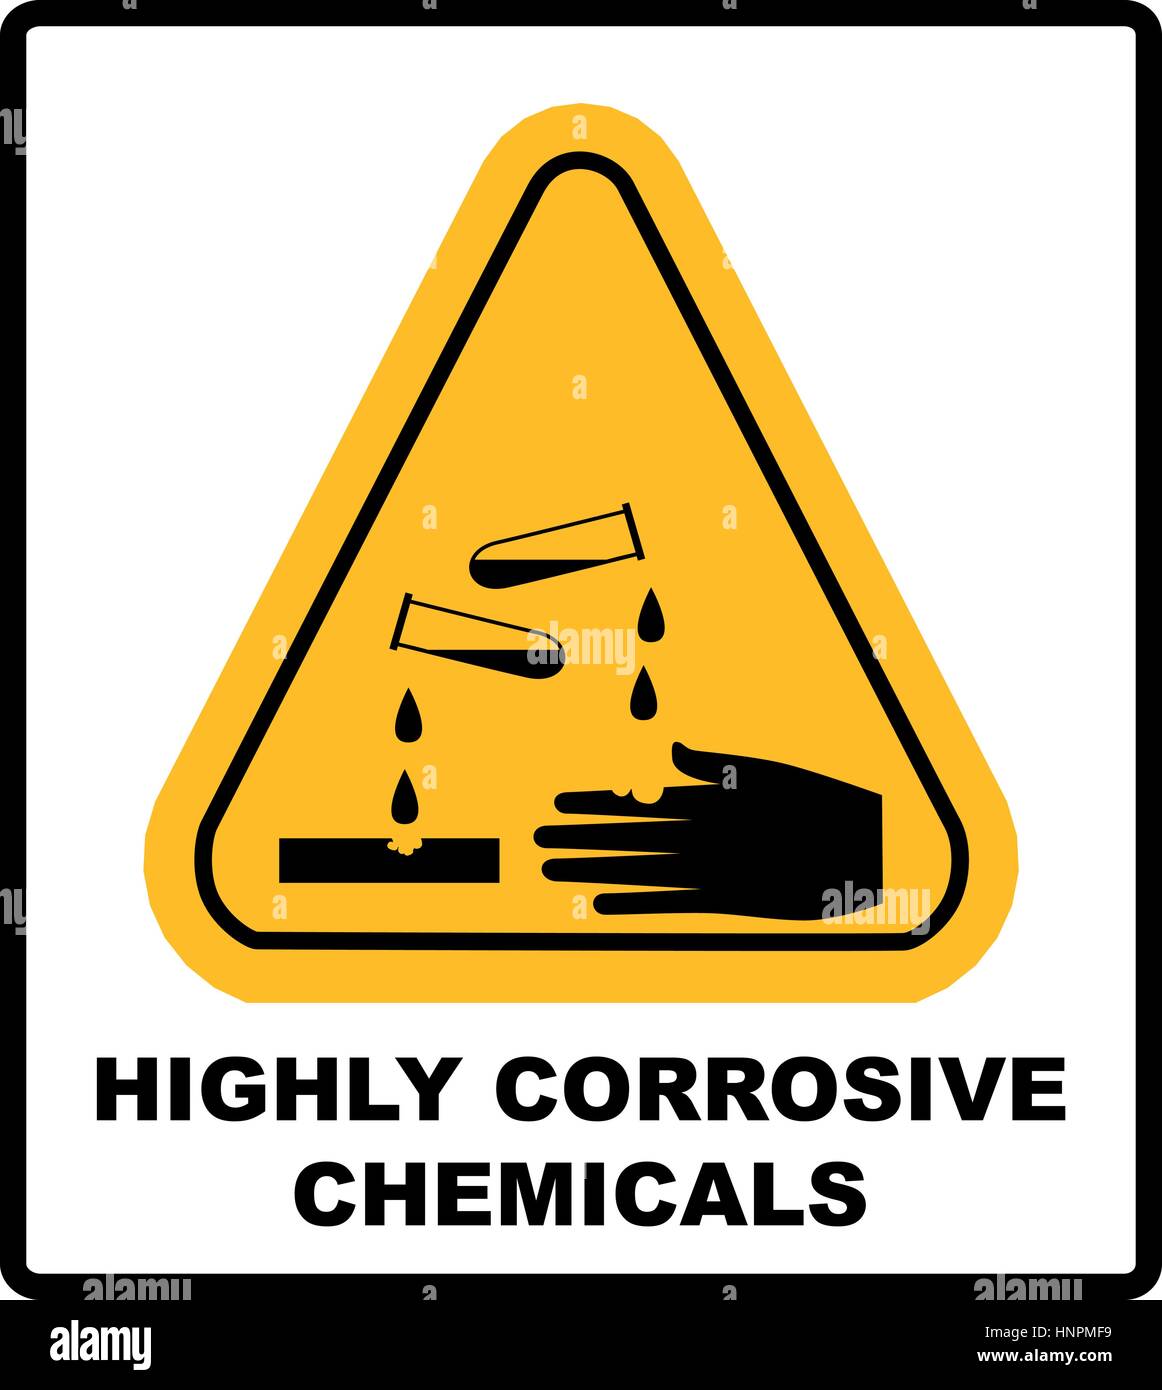 Highly corrosive chemicals sign in yellow triangle isolated on white danger banner with text Stock Vector